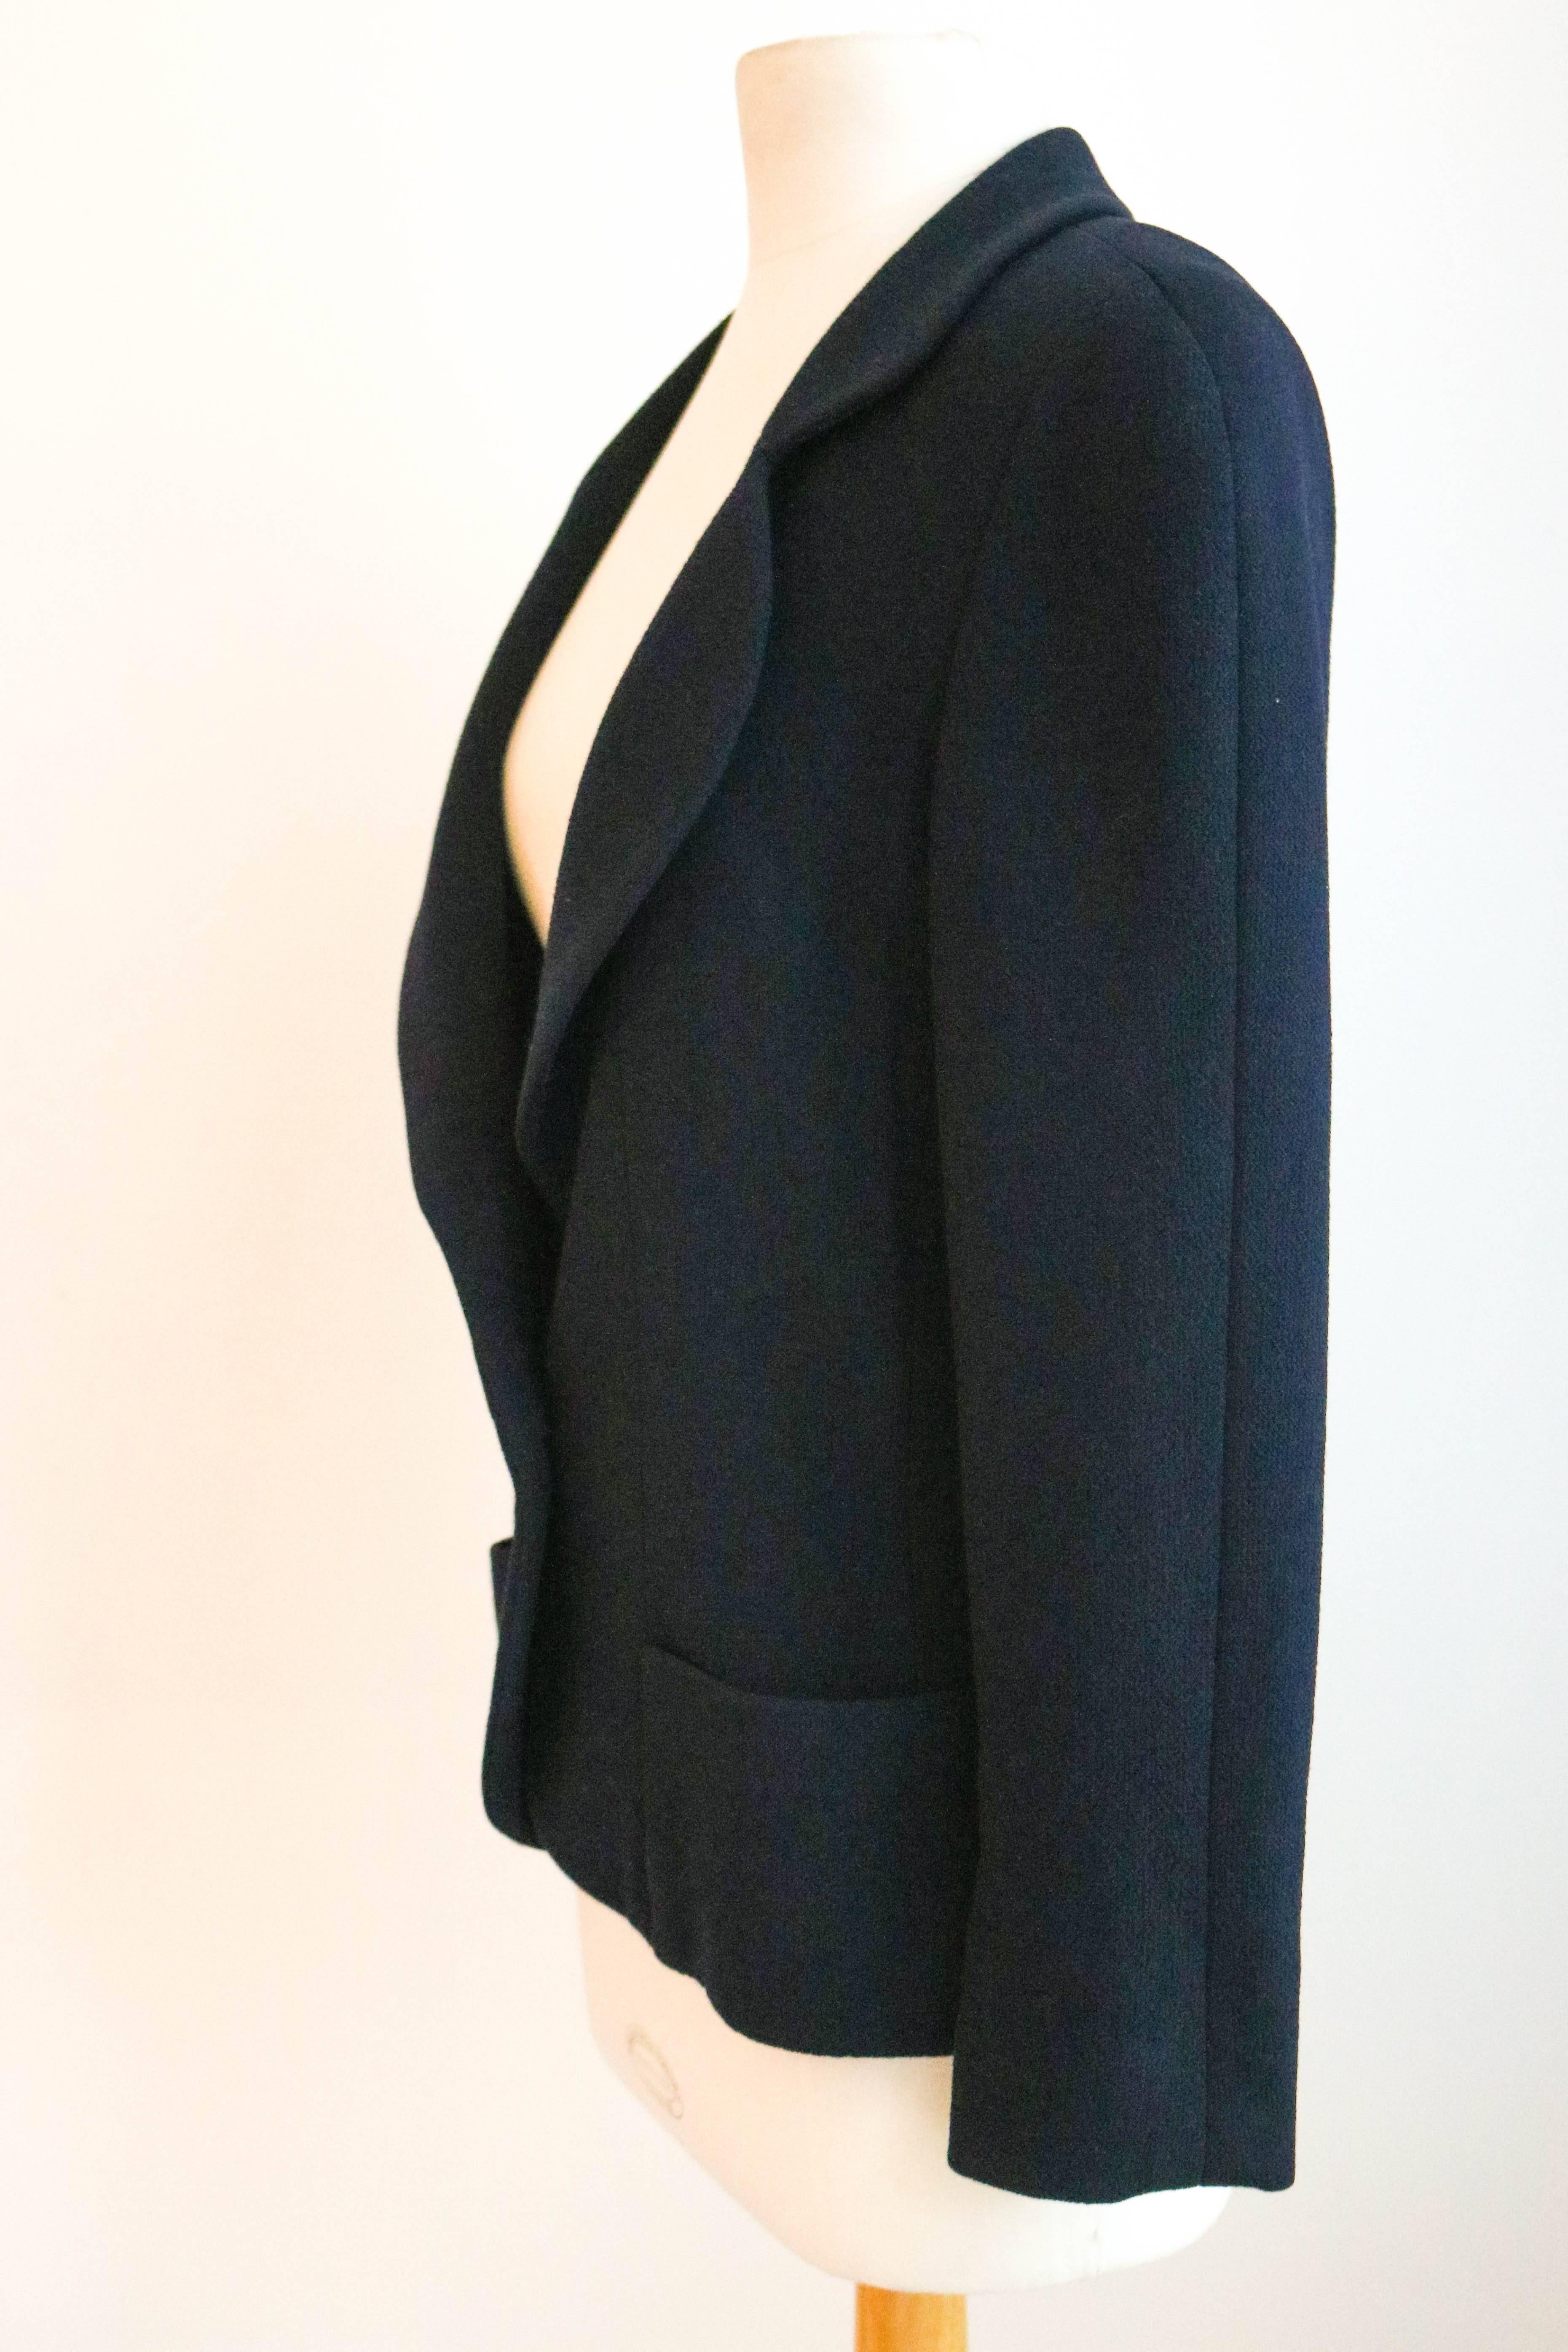 Offered is a classic Chanel blazer in navy with elegant details.  Fitted waste with a notched collar.  One large round button with gold CC logo. Two pockets on front.  Fitted to size on model to be 36, tags have been removed.  
